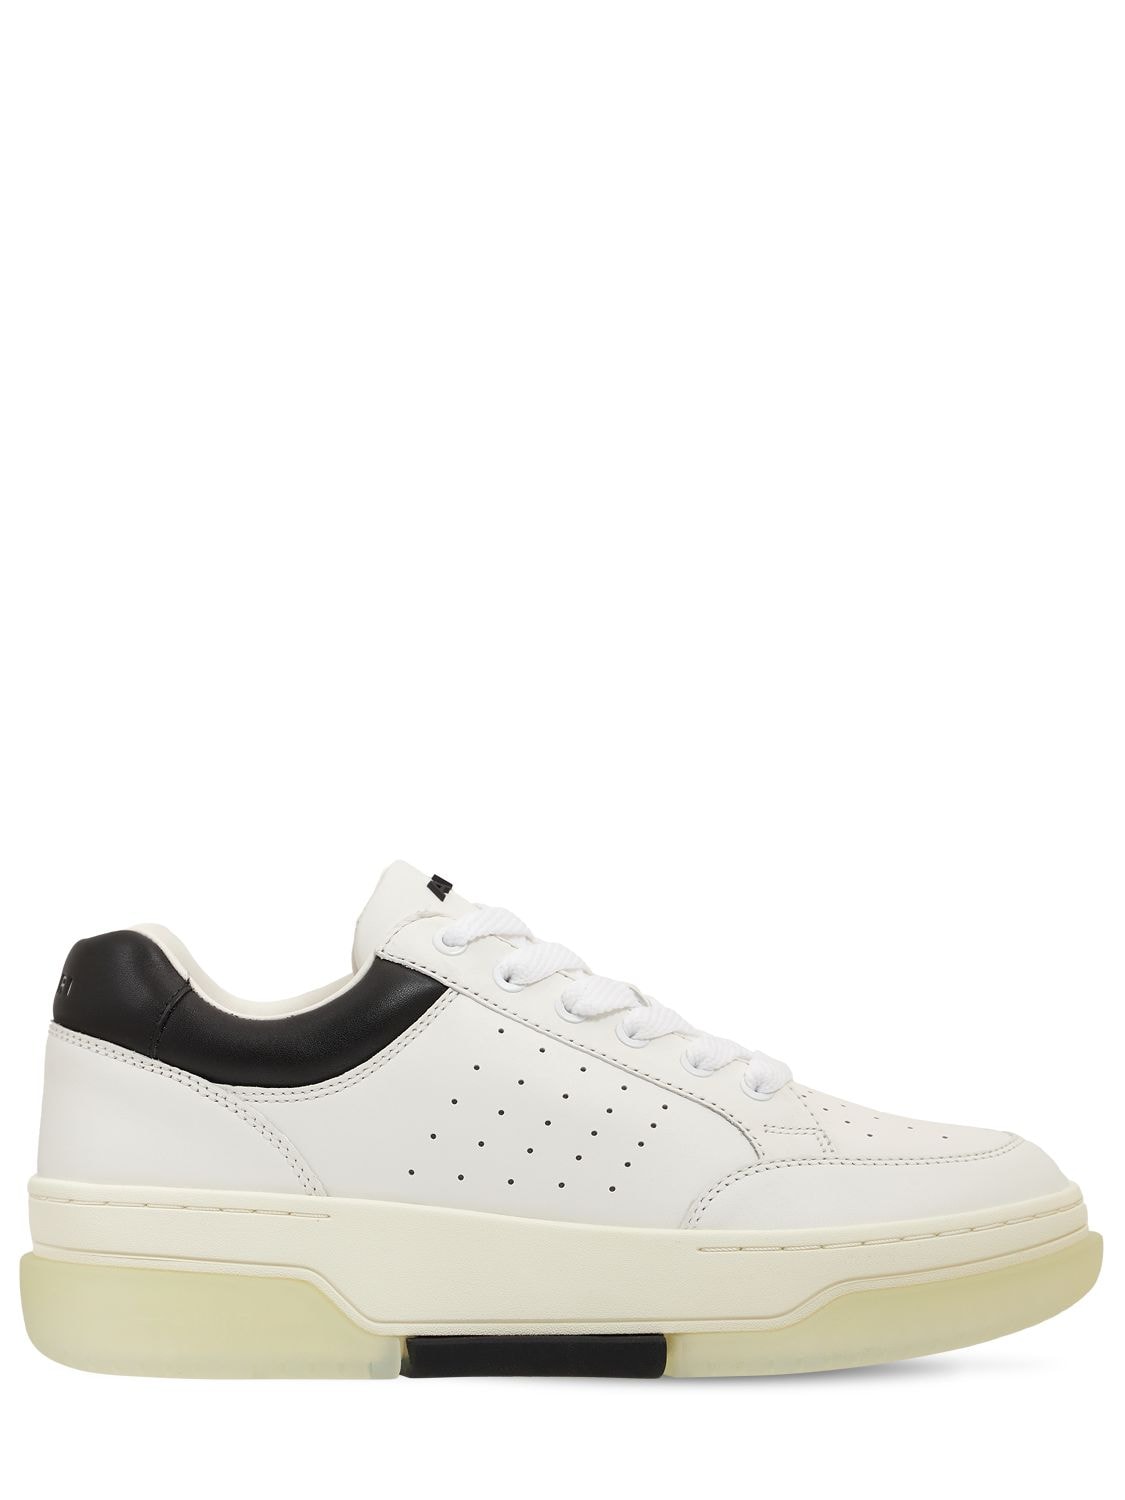 Mens Trainers Amiri Trainers Amiri Leather Stadium Low Sneakers in White & Black White for Men Save 74% 